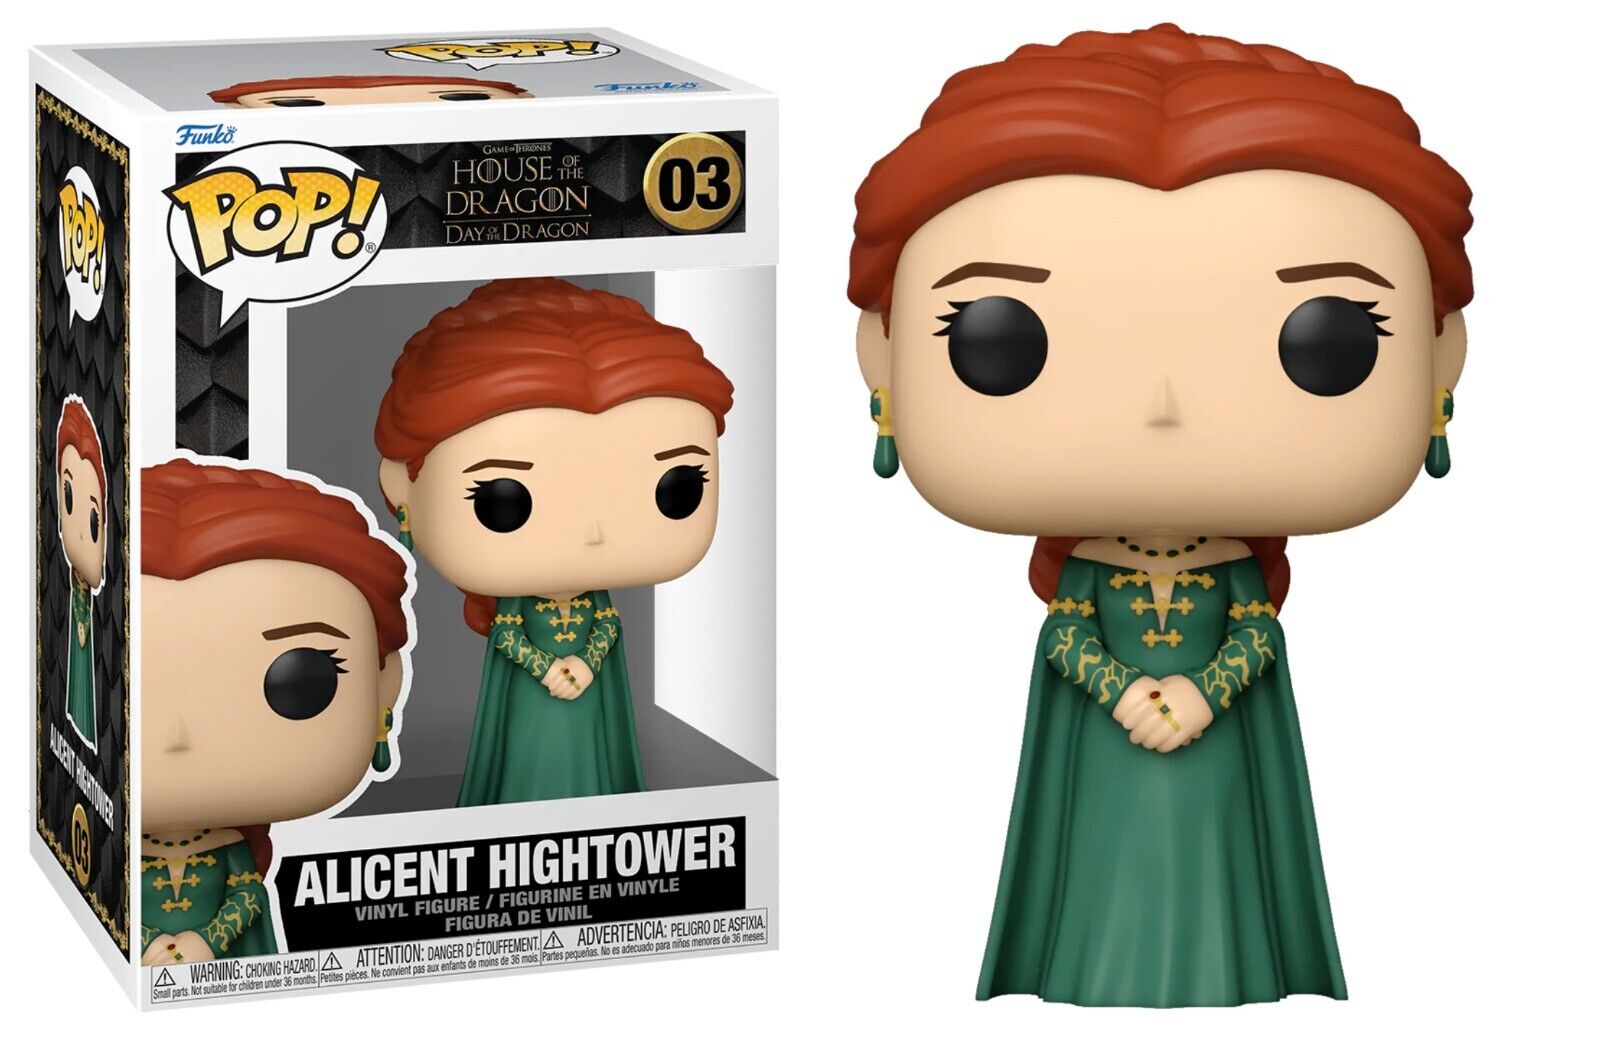 Game of Thrones: House of the Dragon - Alicent Hightower Pop! Vinyl Figure (03)